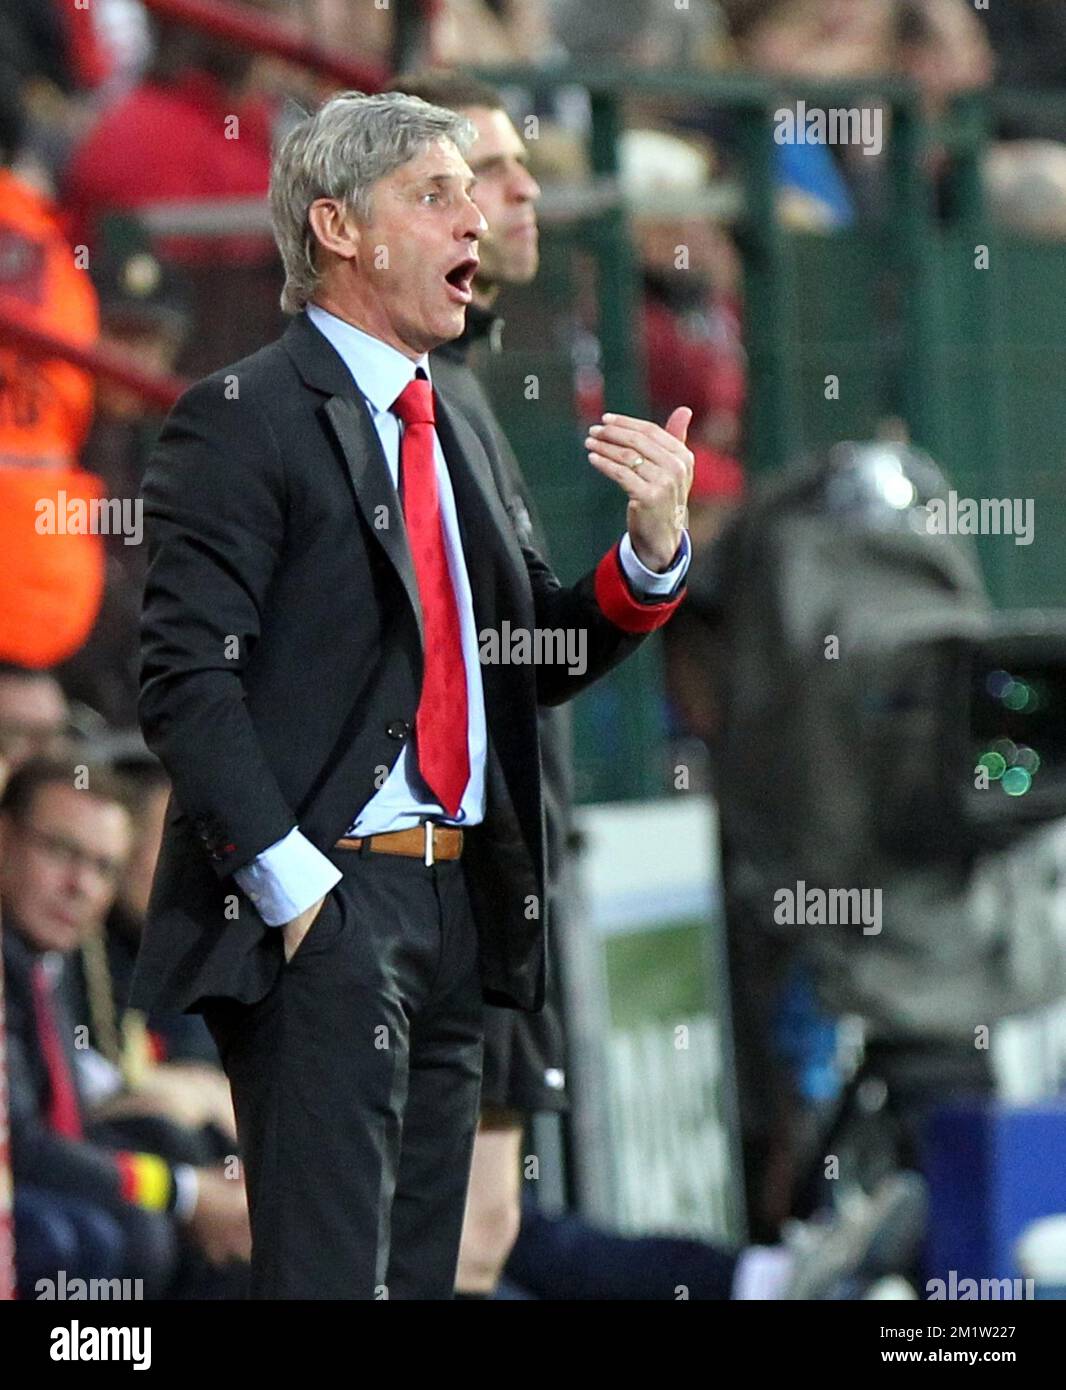 Standard's head coach Jose Riga reacts during the Jupiler Pro League match of Play-Off group 1, between Standard de Liege and KV Kortrijk, in Liege, Saturday 28 April 2012, on day 6 of the Play-Off 1 of the Belgian soccer championship. BELGA PHOTO MICHEL KRAKOWSKI Stock Photo